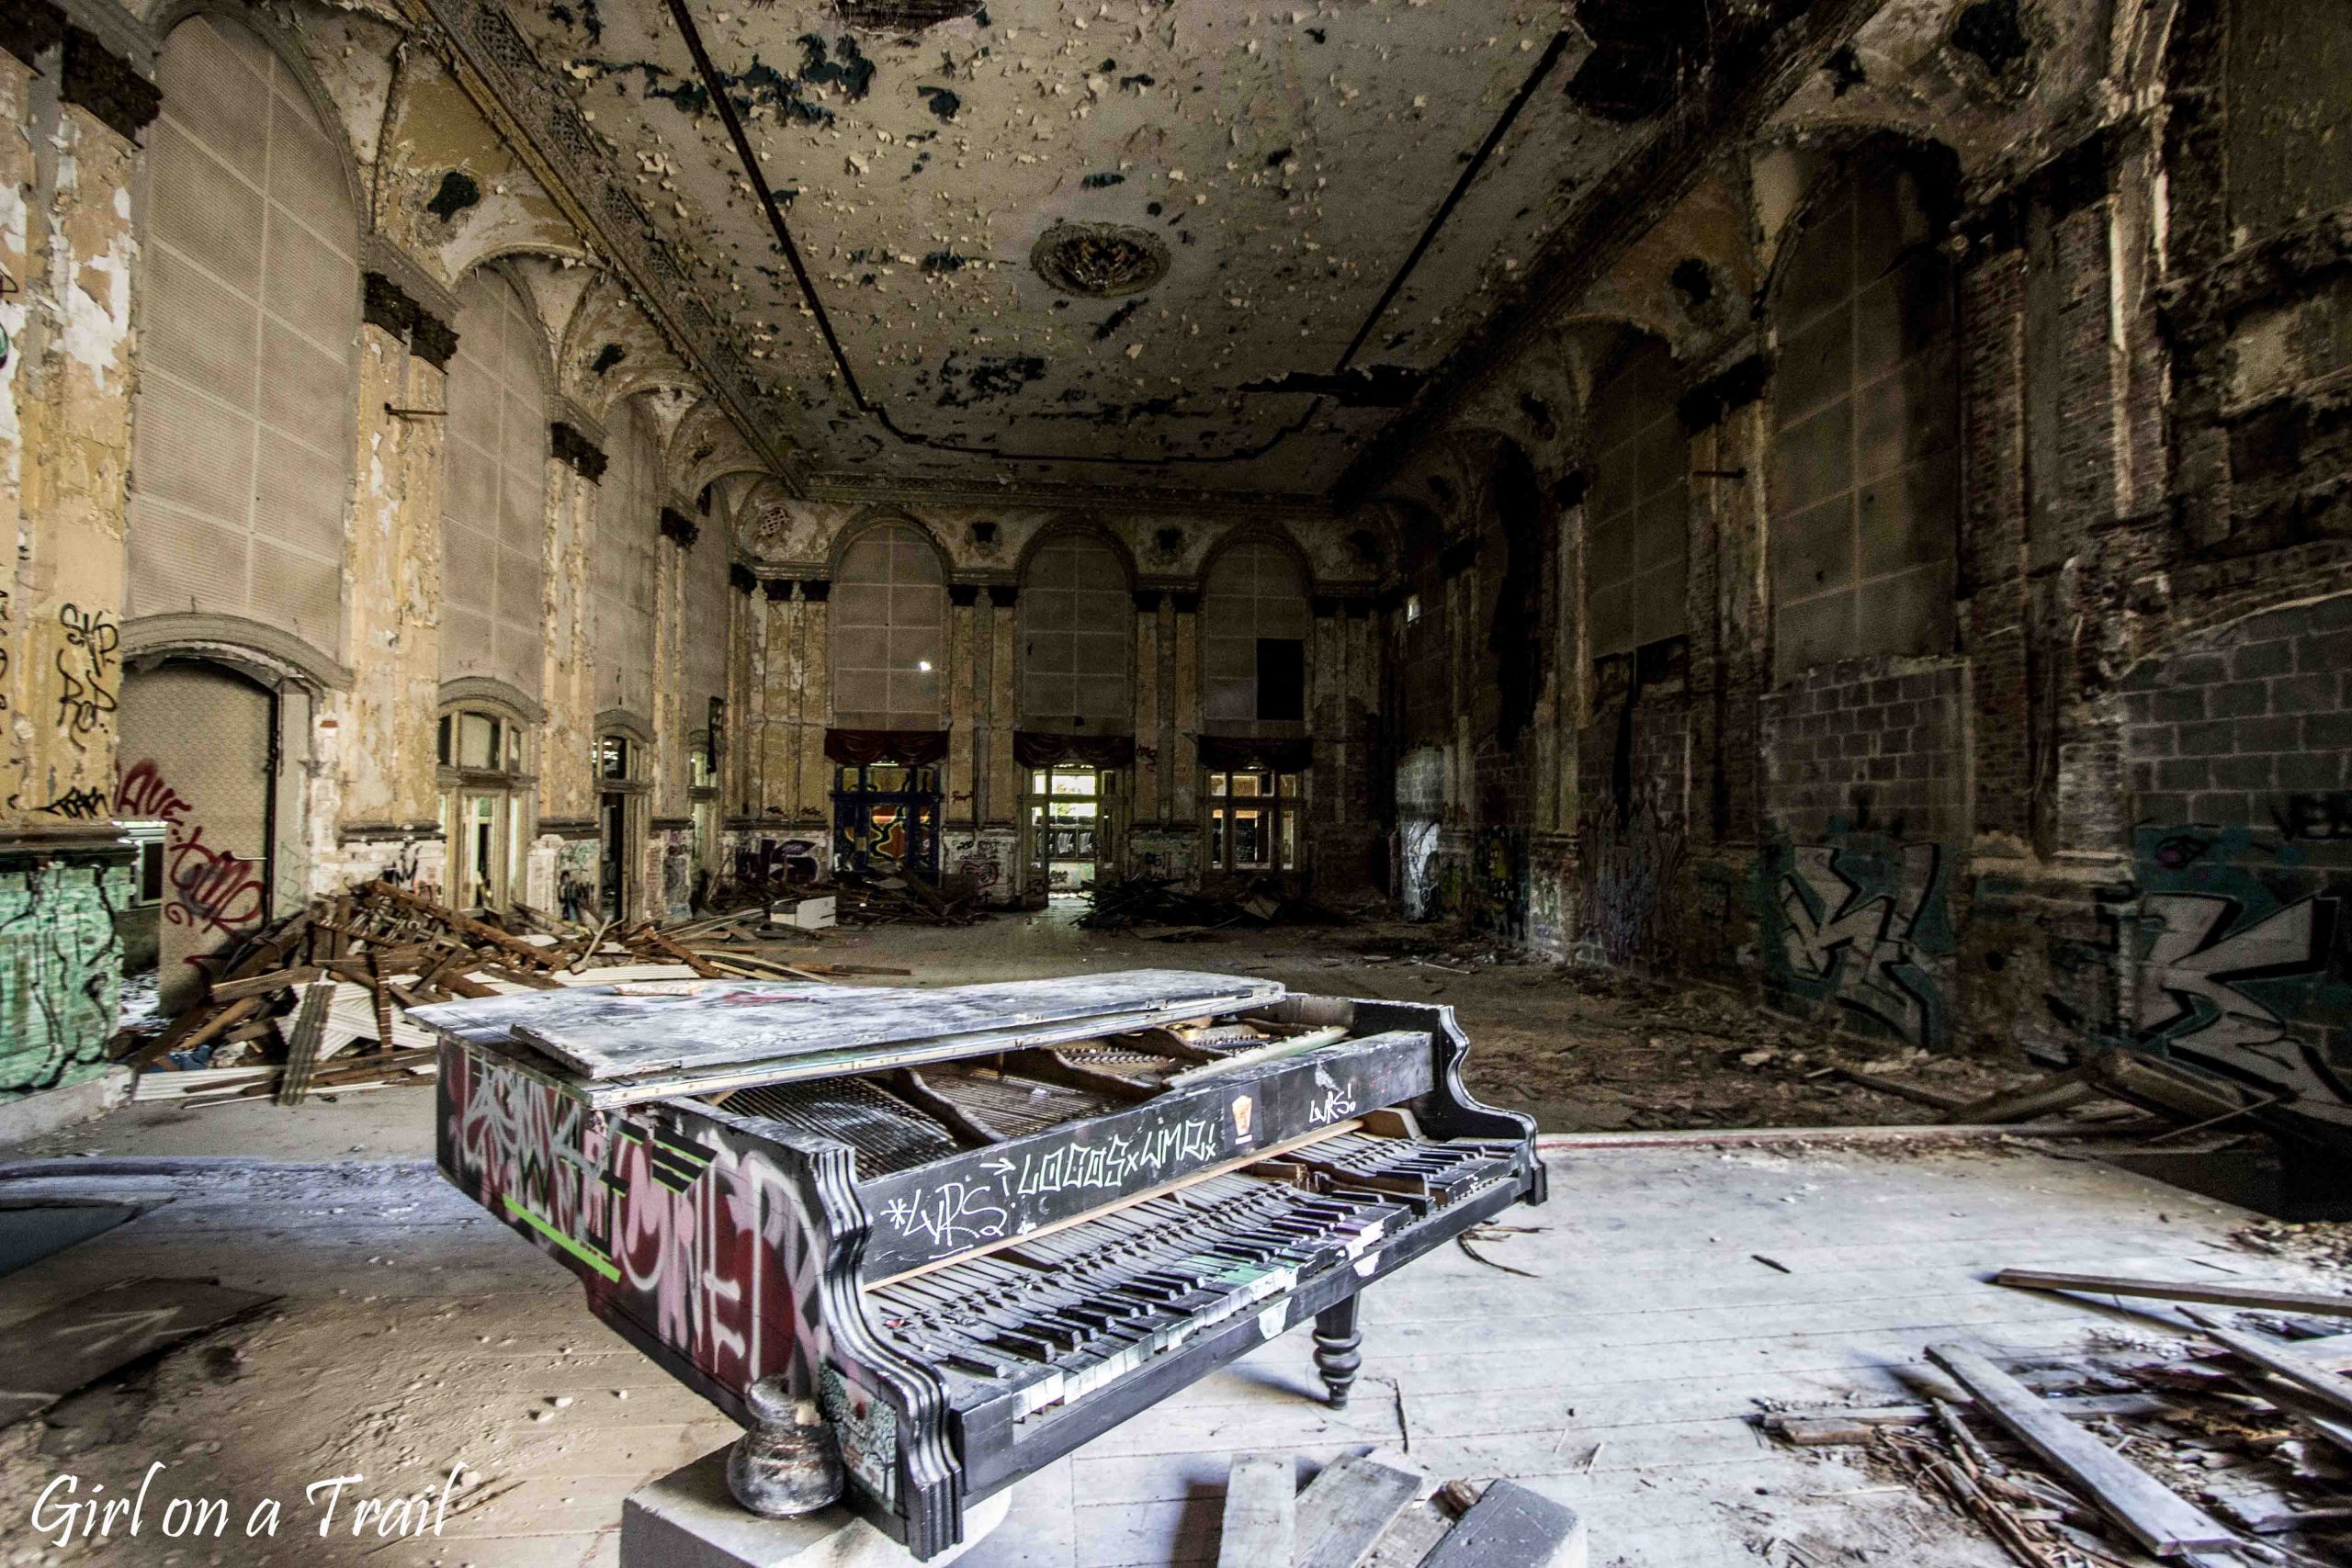 Berlin in ruins – an invitation to after party